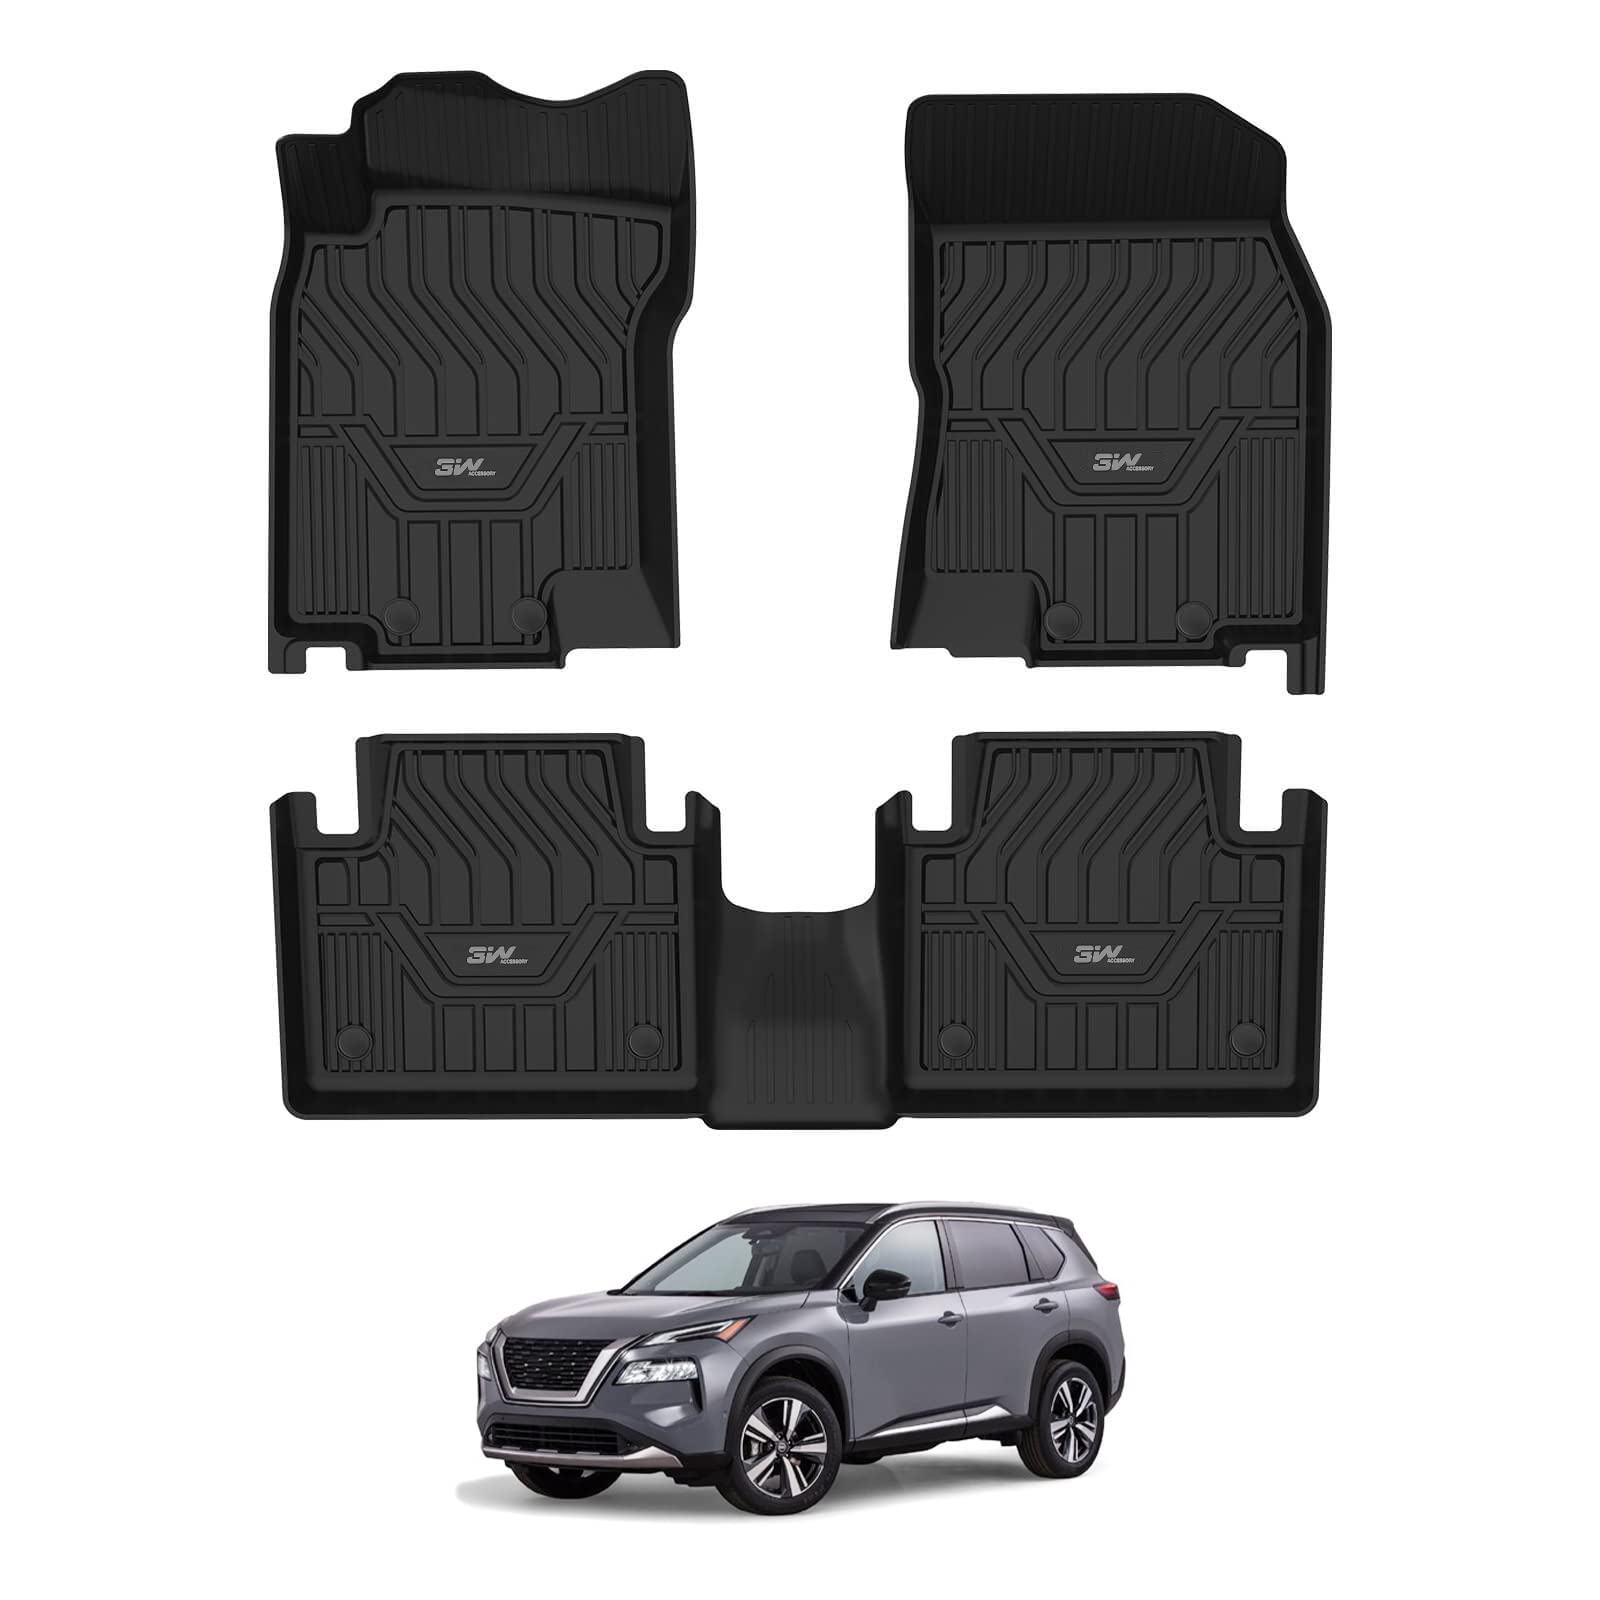 3W Nissan Rogue 2014-2020 Custom Floor Mats Cargo Liner TPE Material & All-Weather Protection Vehicles & Parts 3Wliners 2014-2020 Rogue 2014-2020 1st&2nd Row Mats